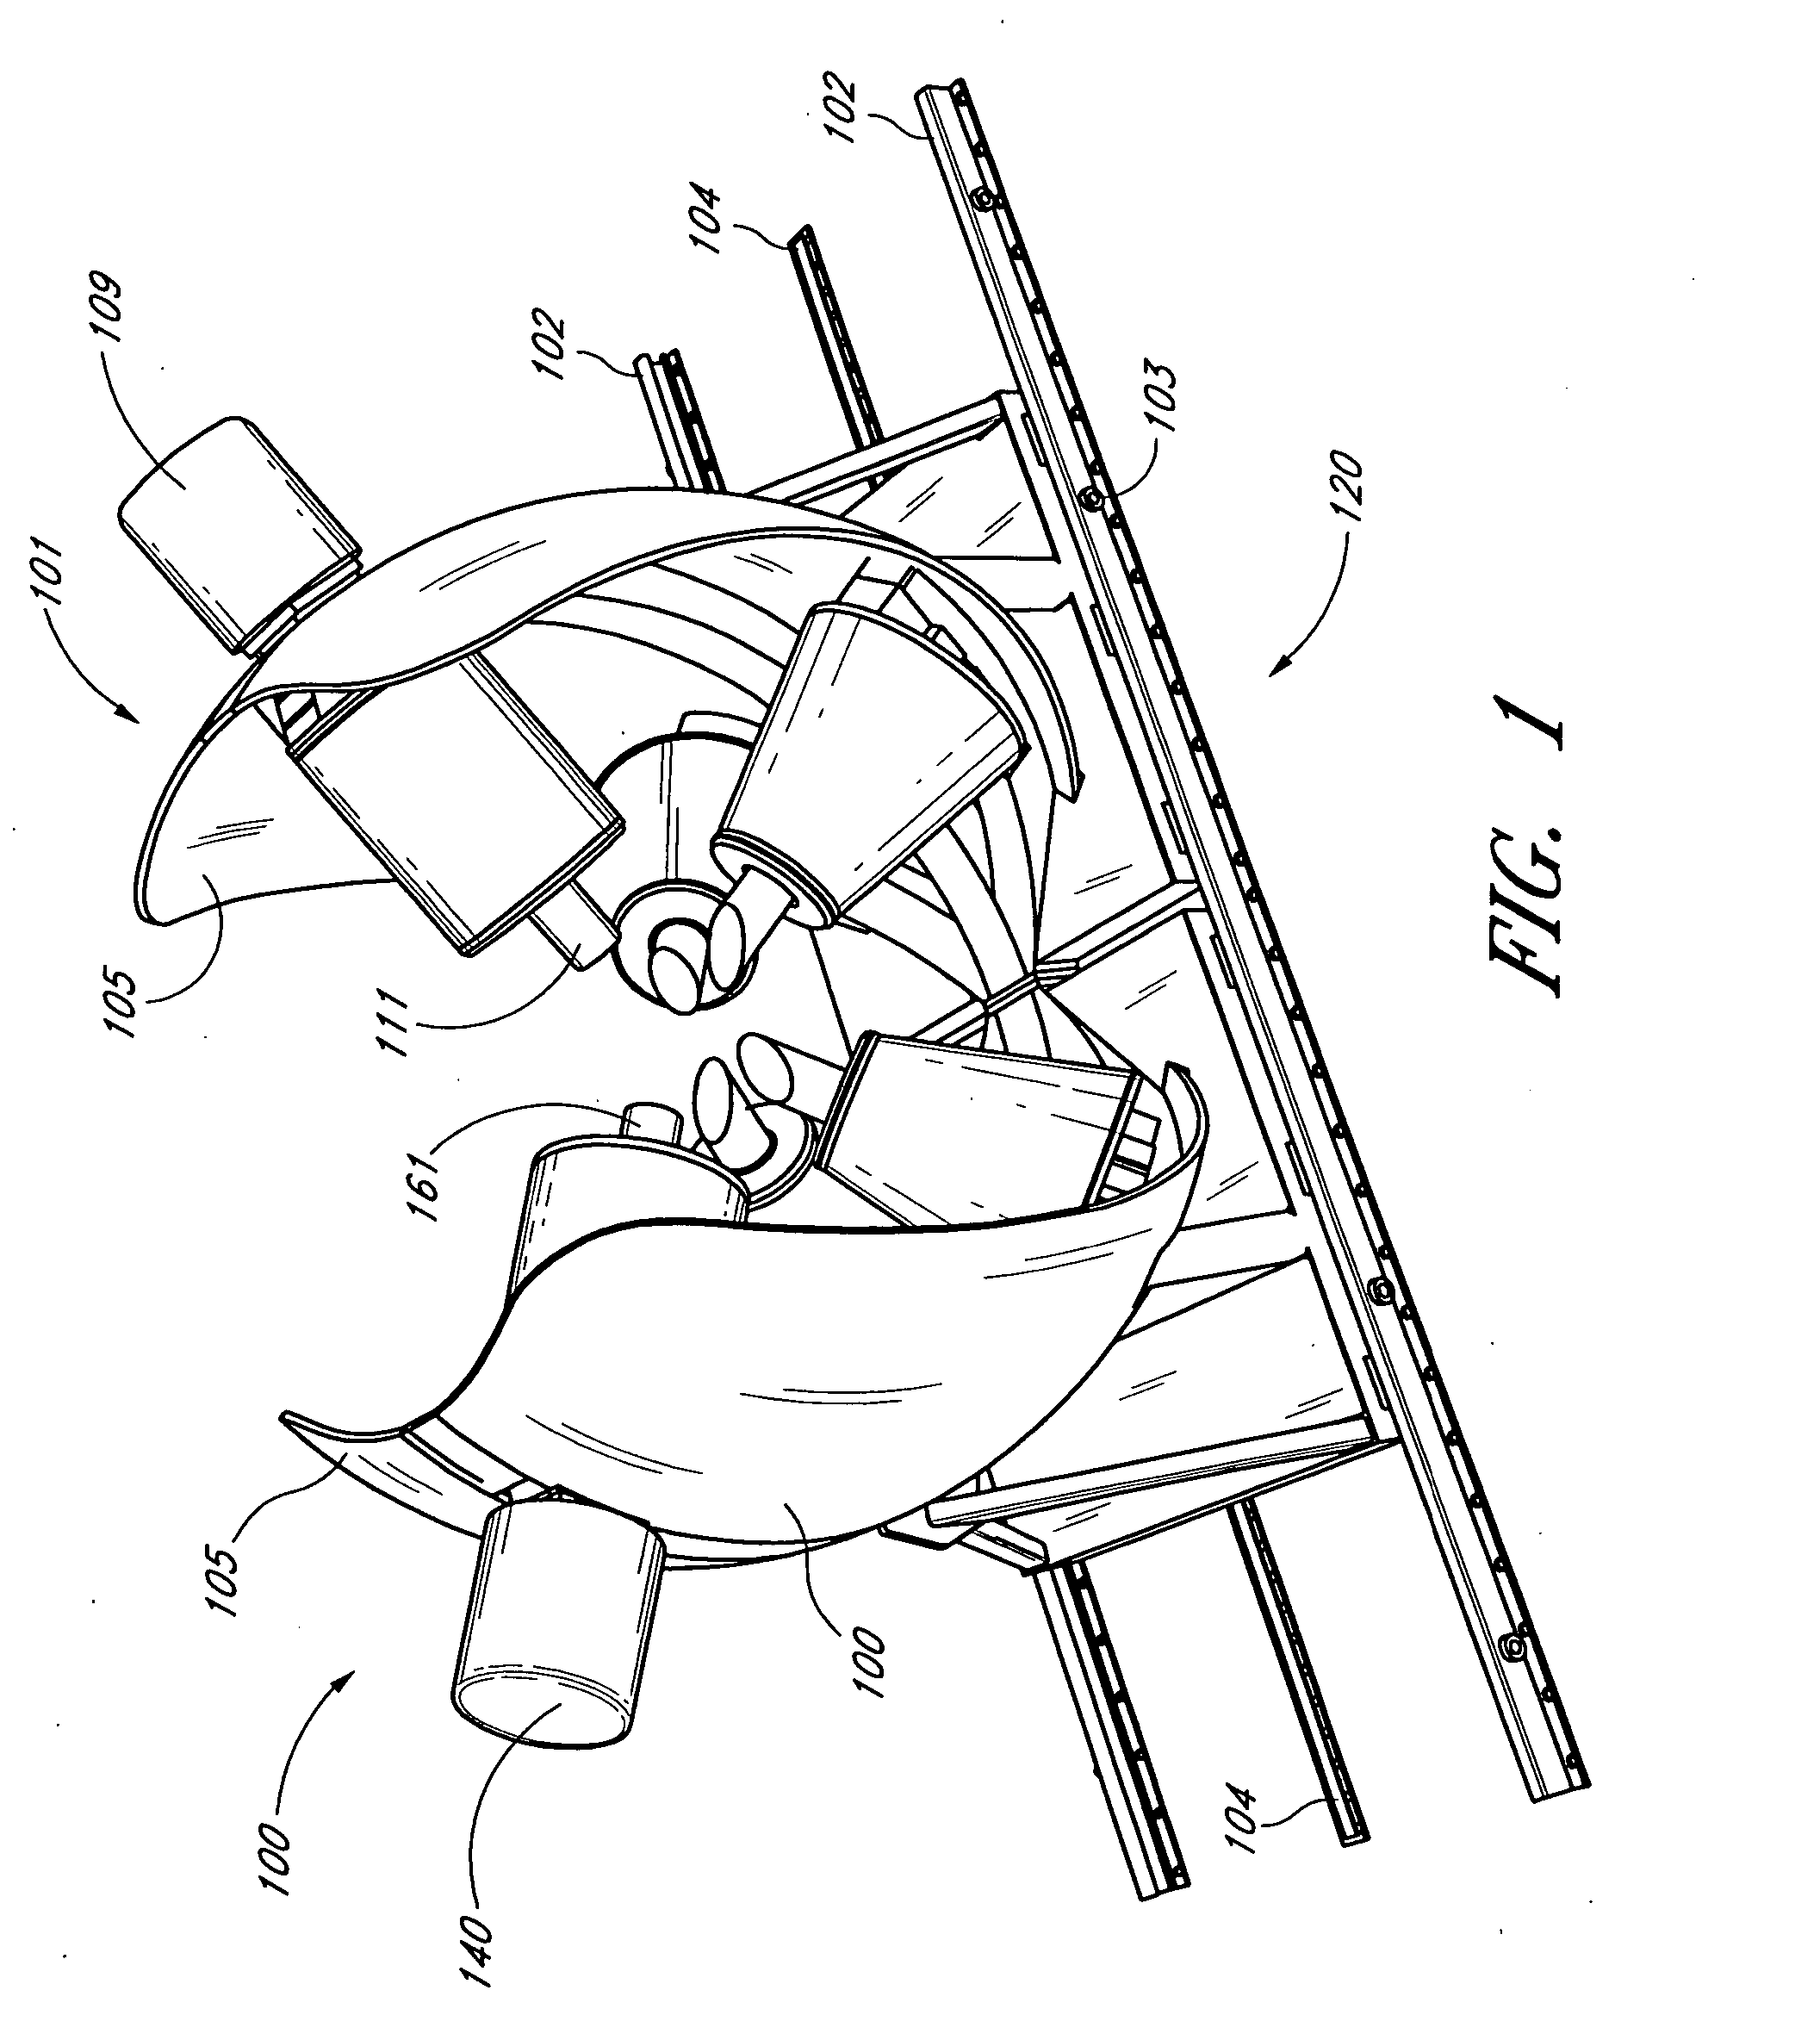 Apparatus and method for shaped magnetic field control for catheter, guidance, control, and imaging